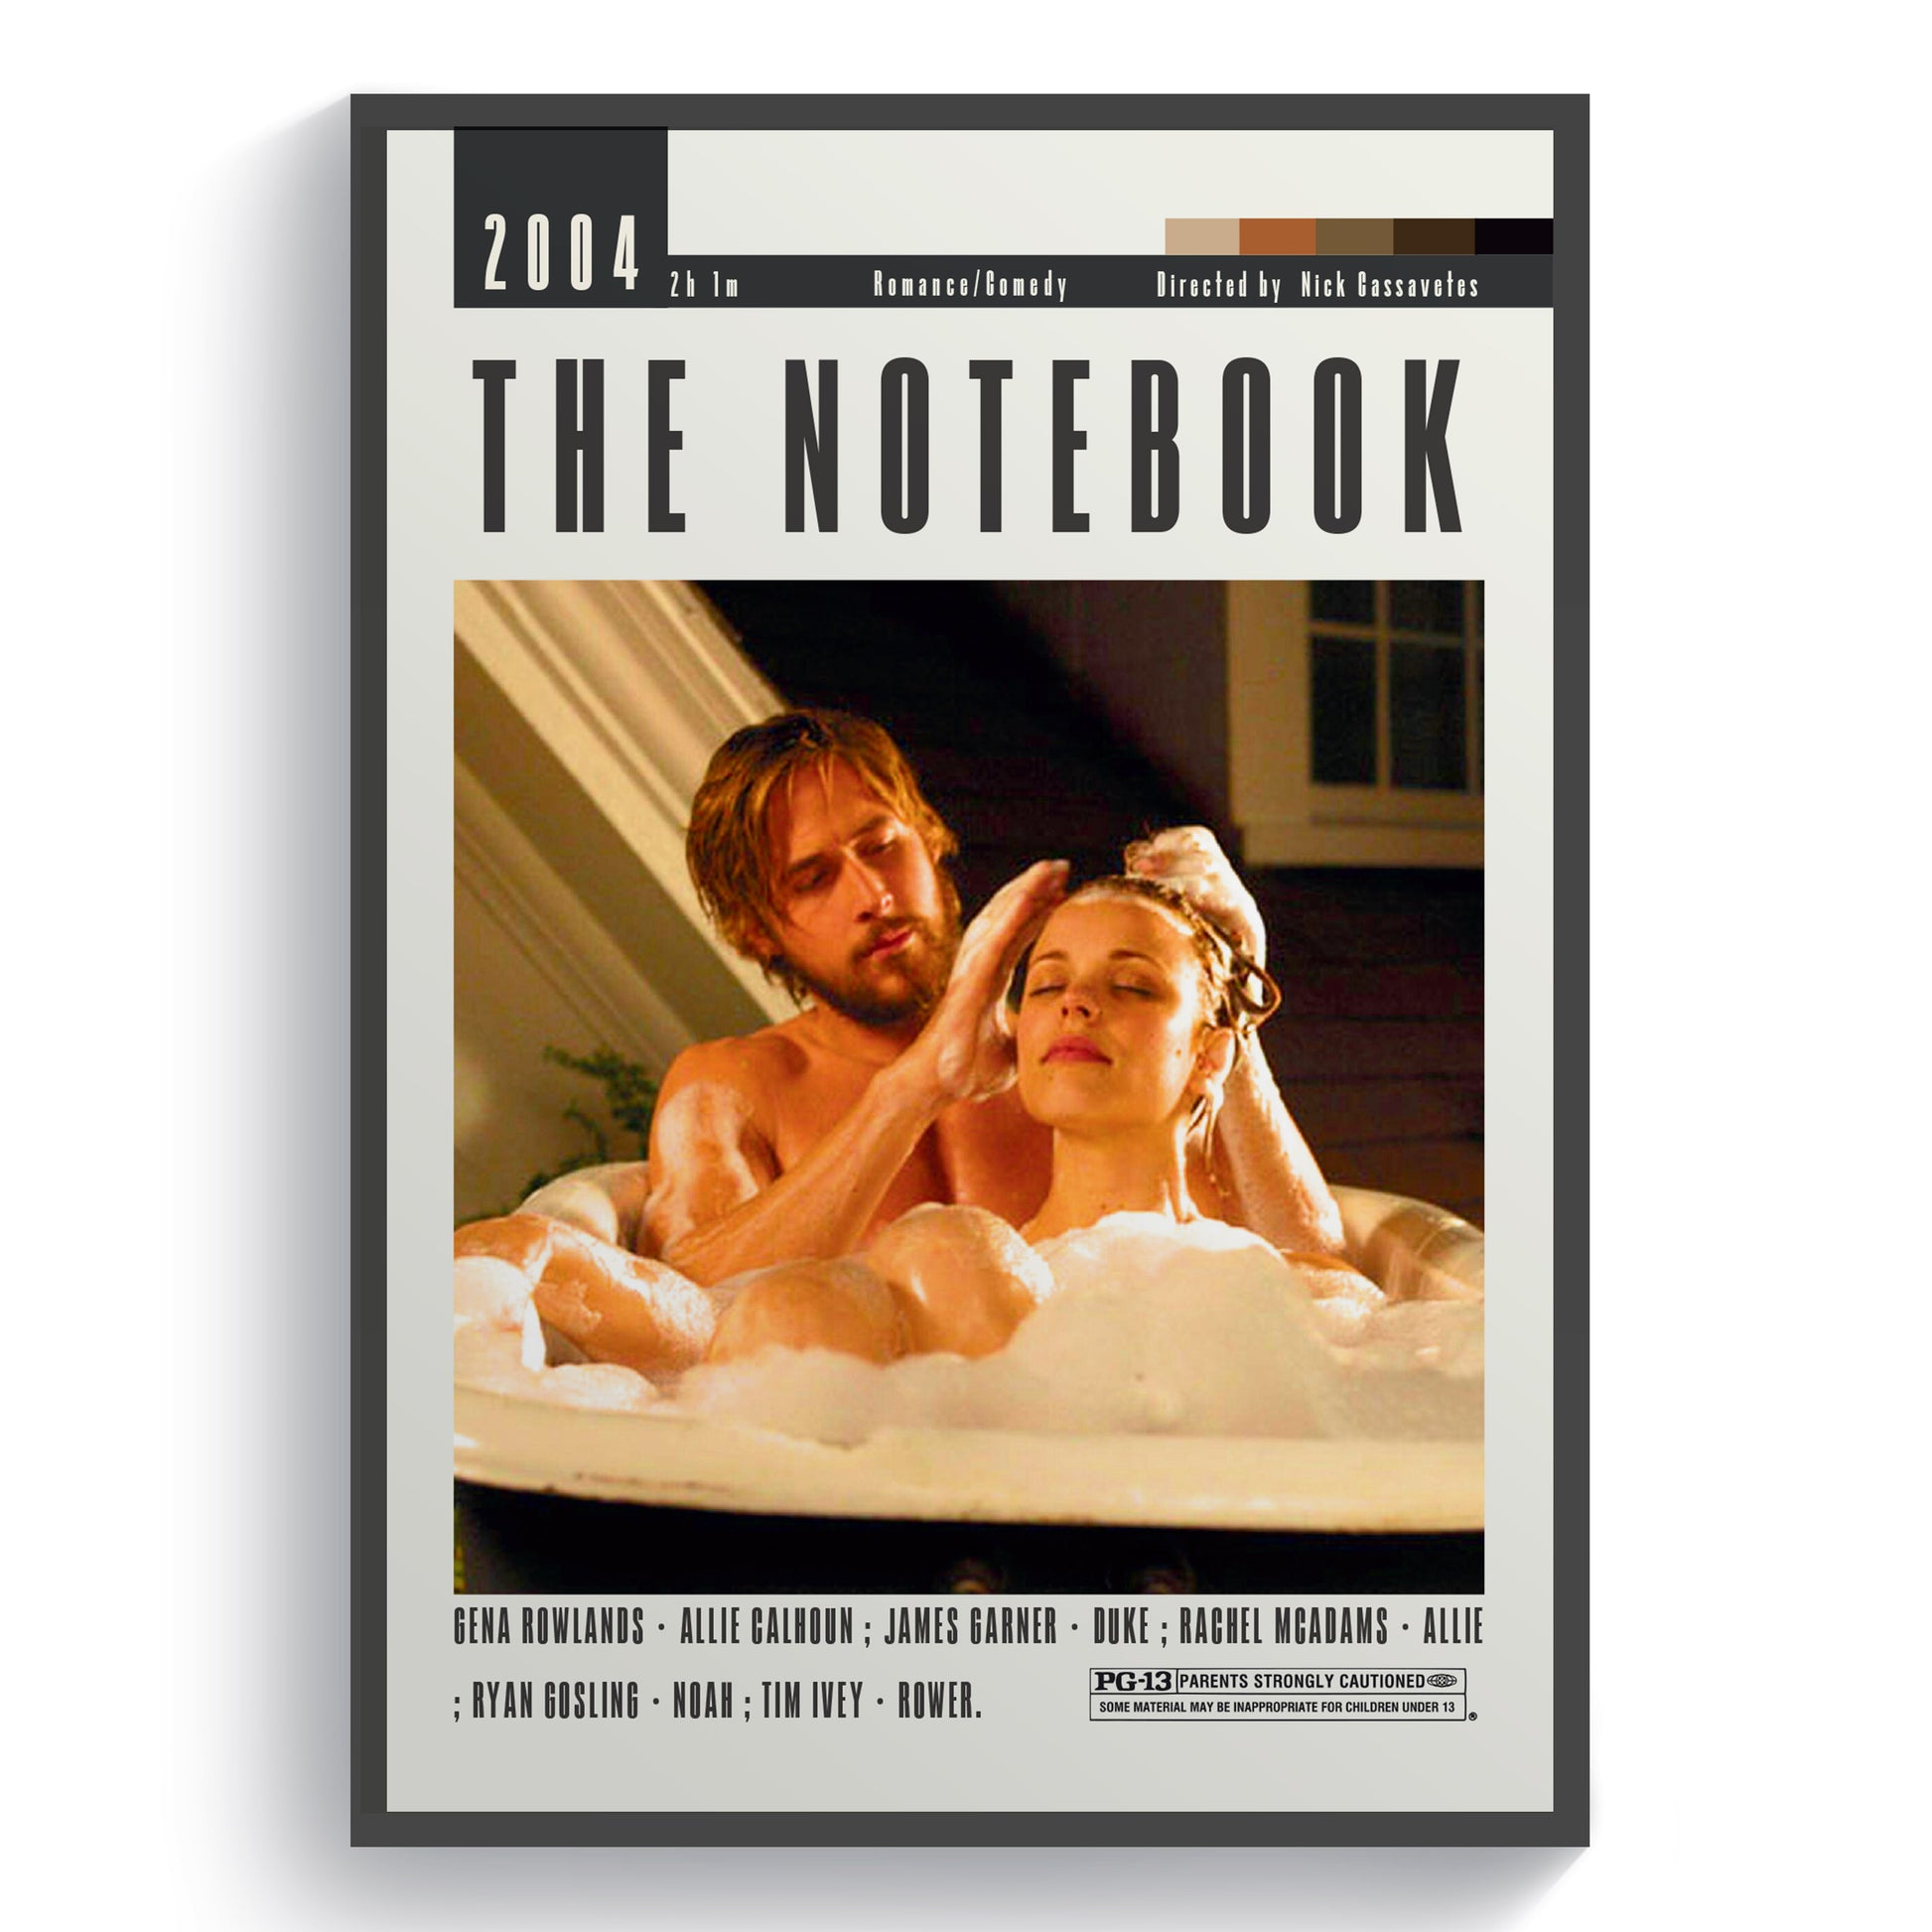 Expertly designed for fans of Nick Gassavetes movies, The Notebook Posters are the perfect addition to any movie lover's collection. Featuring stunning imagery and crisp details, these posters bring your favorite films to life and make the perfect statement piece for any room. Elevate your movie viewing experience with these beautiful and professionally crafted posters.